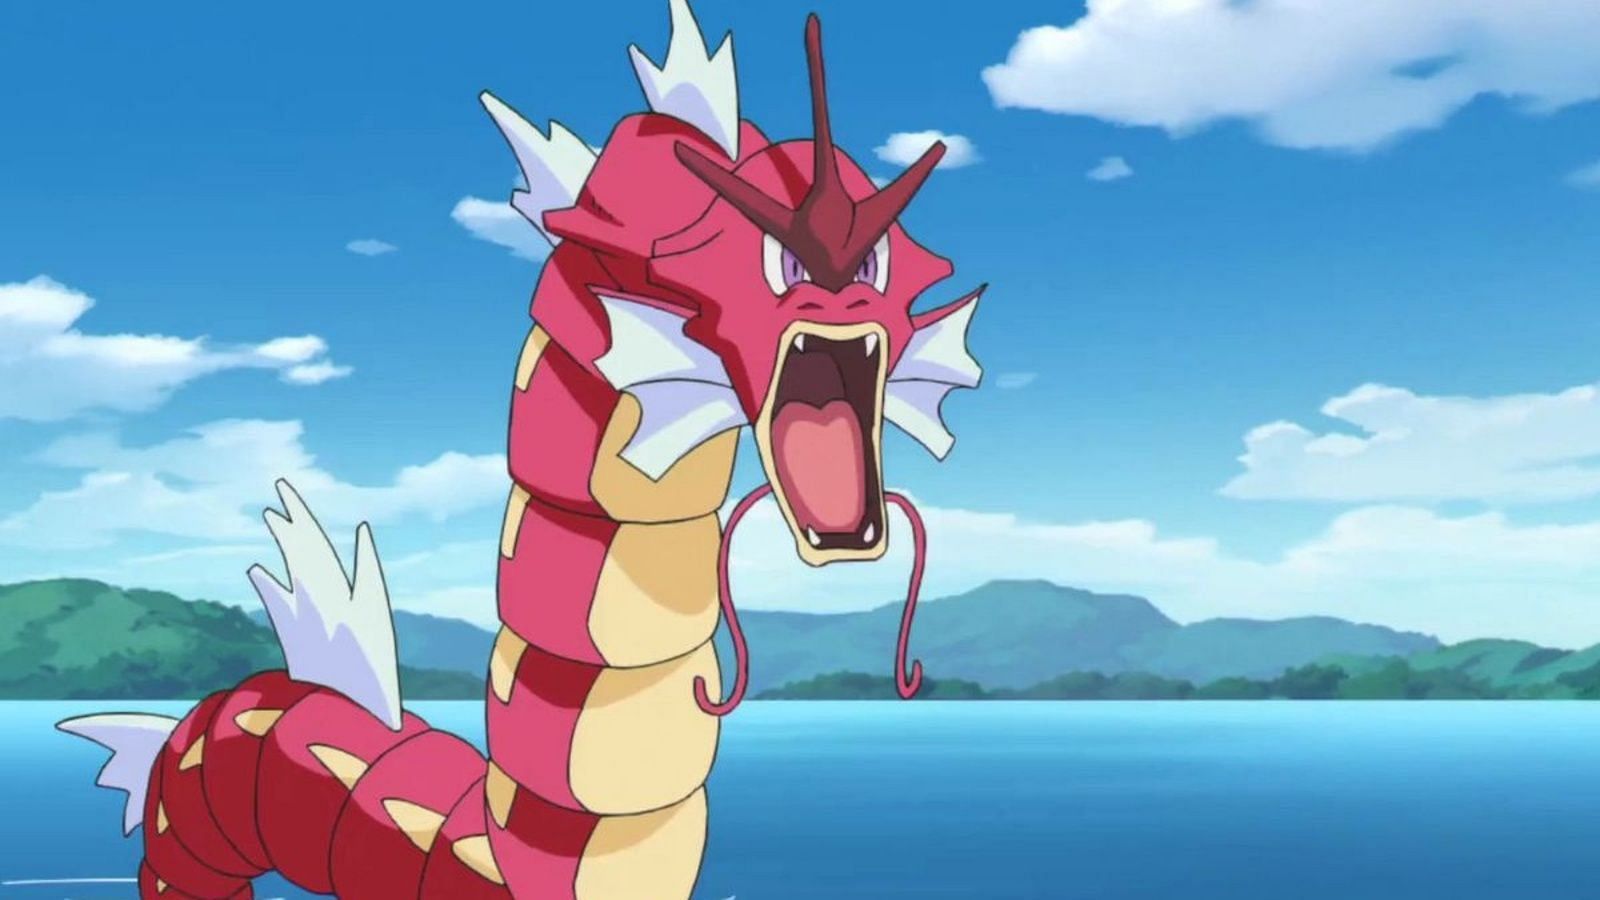 Shiny Gyarados is one of the most iconic Pocket Monsters in Pokemon GO